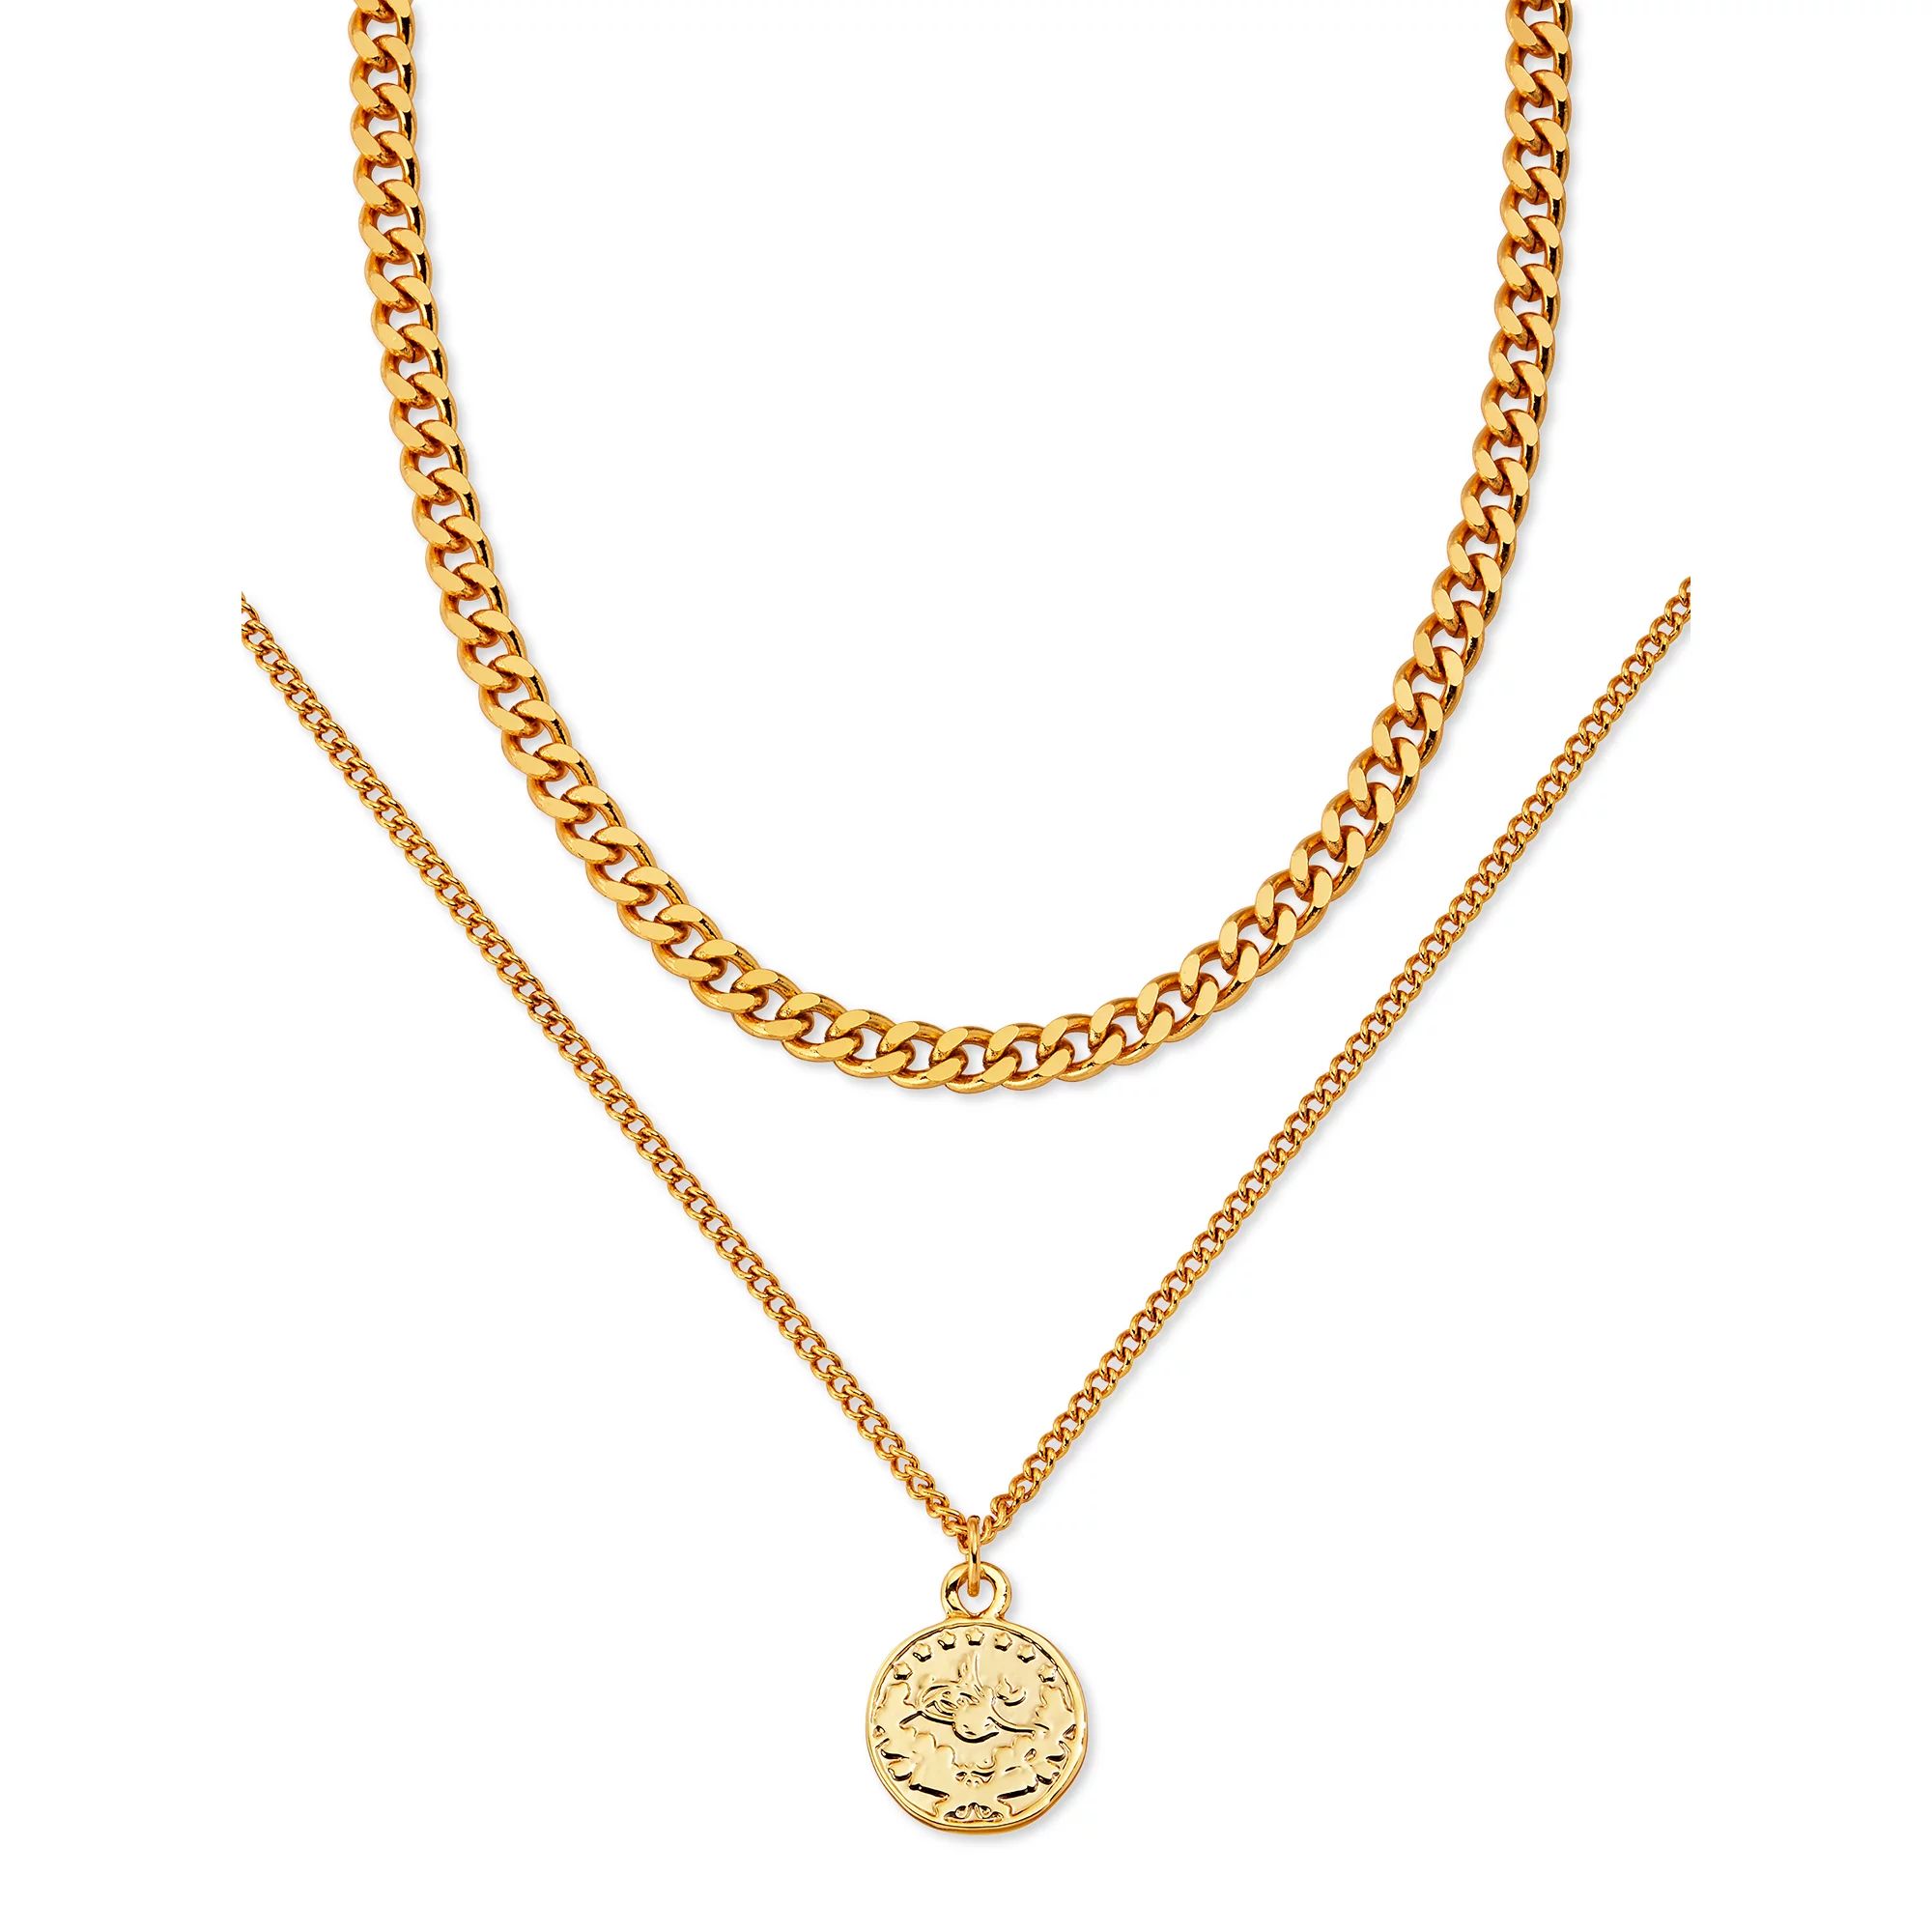 Scoop Brass Yellow Gold-Plated Layered Coin Necklace, 16.5" + 3" Extender | Walmart (US)